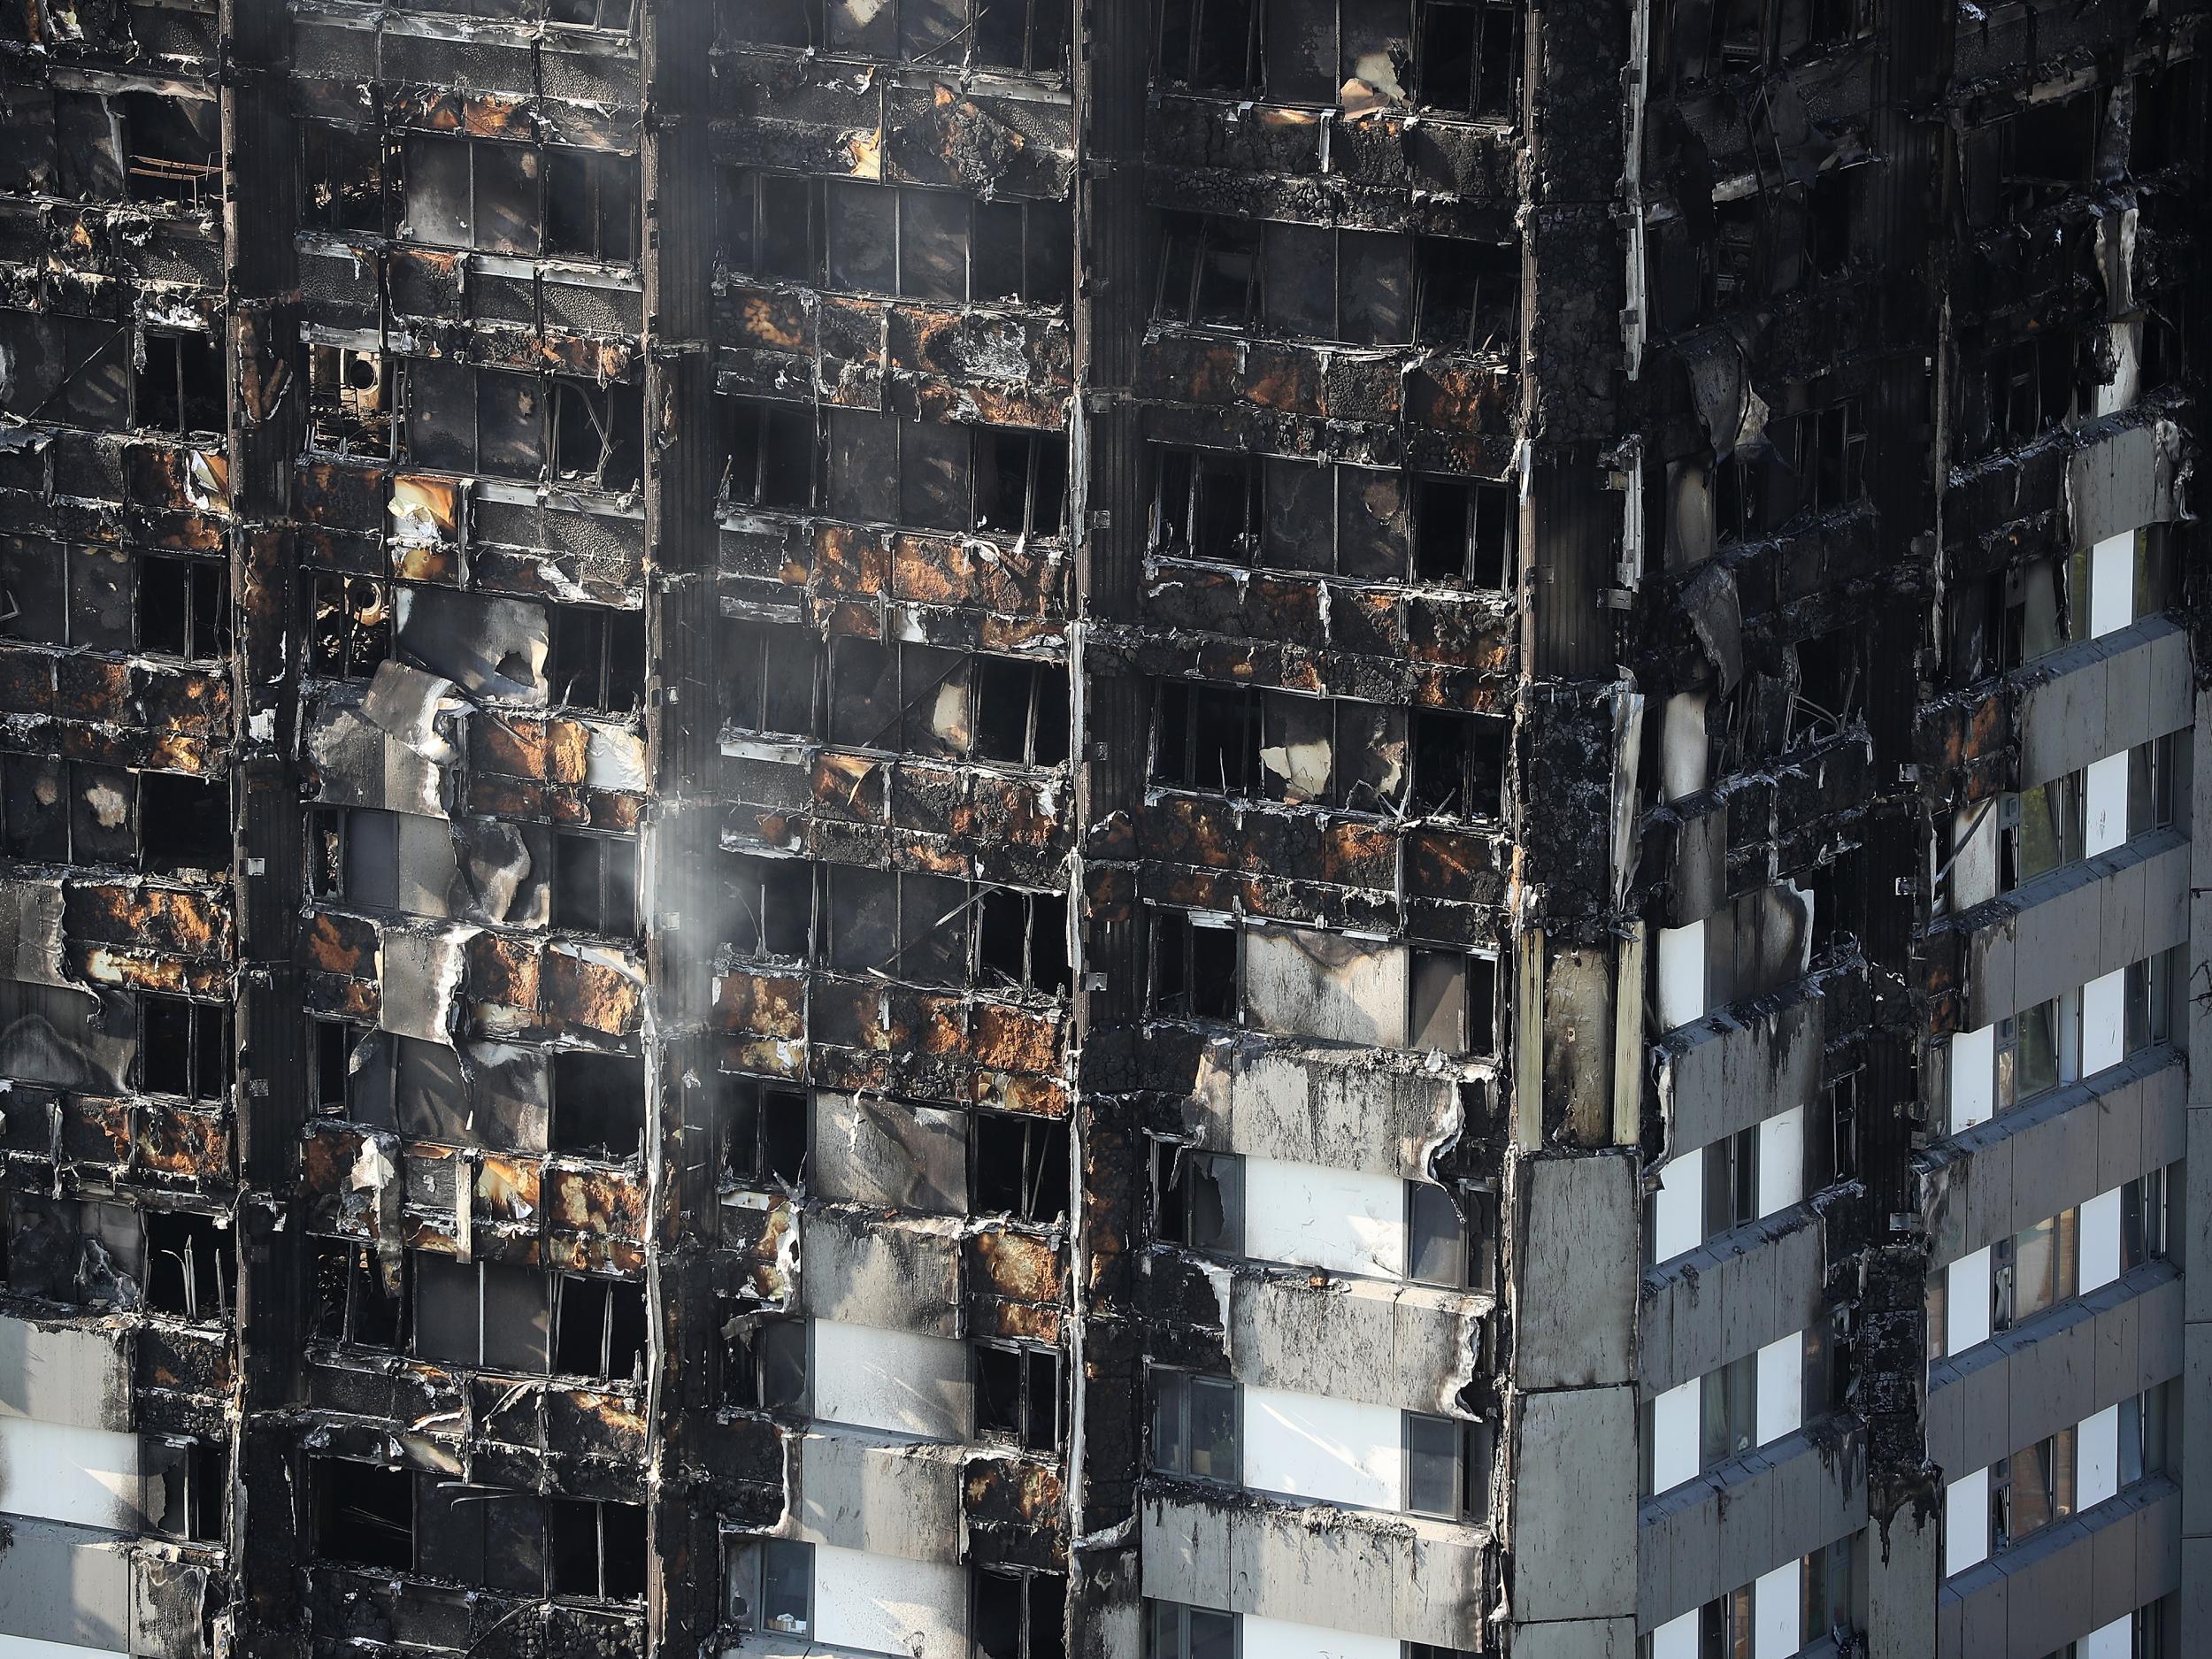 Grenfell Tower continues to smoulder on 15 June 2017